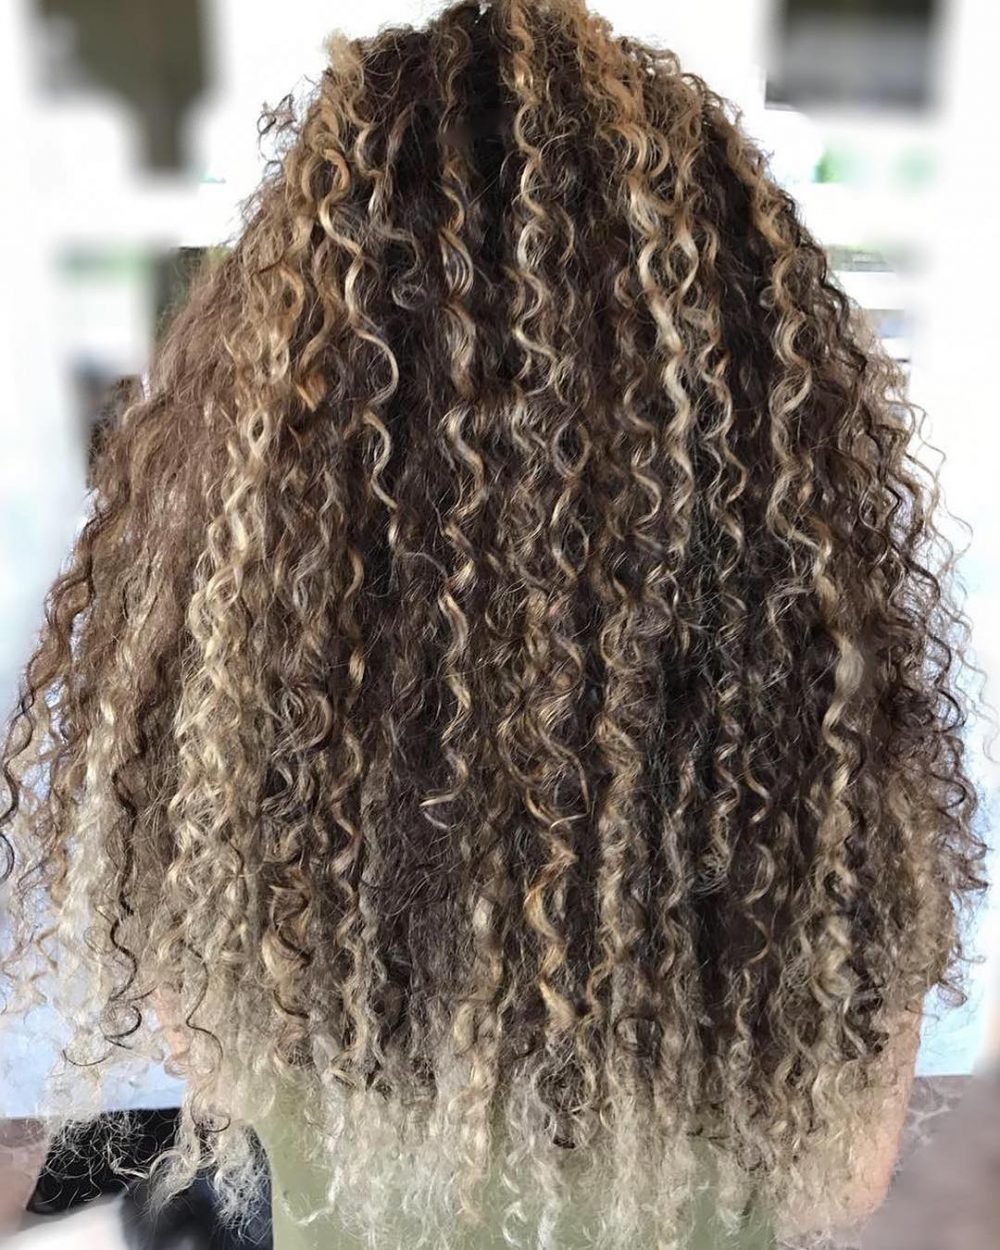 Dirty Blonde Balayage Highlights on Curly Hair